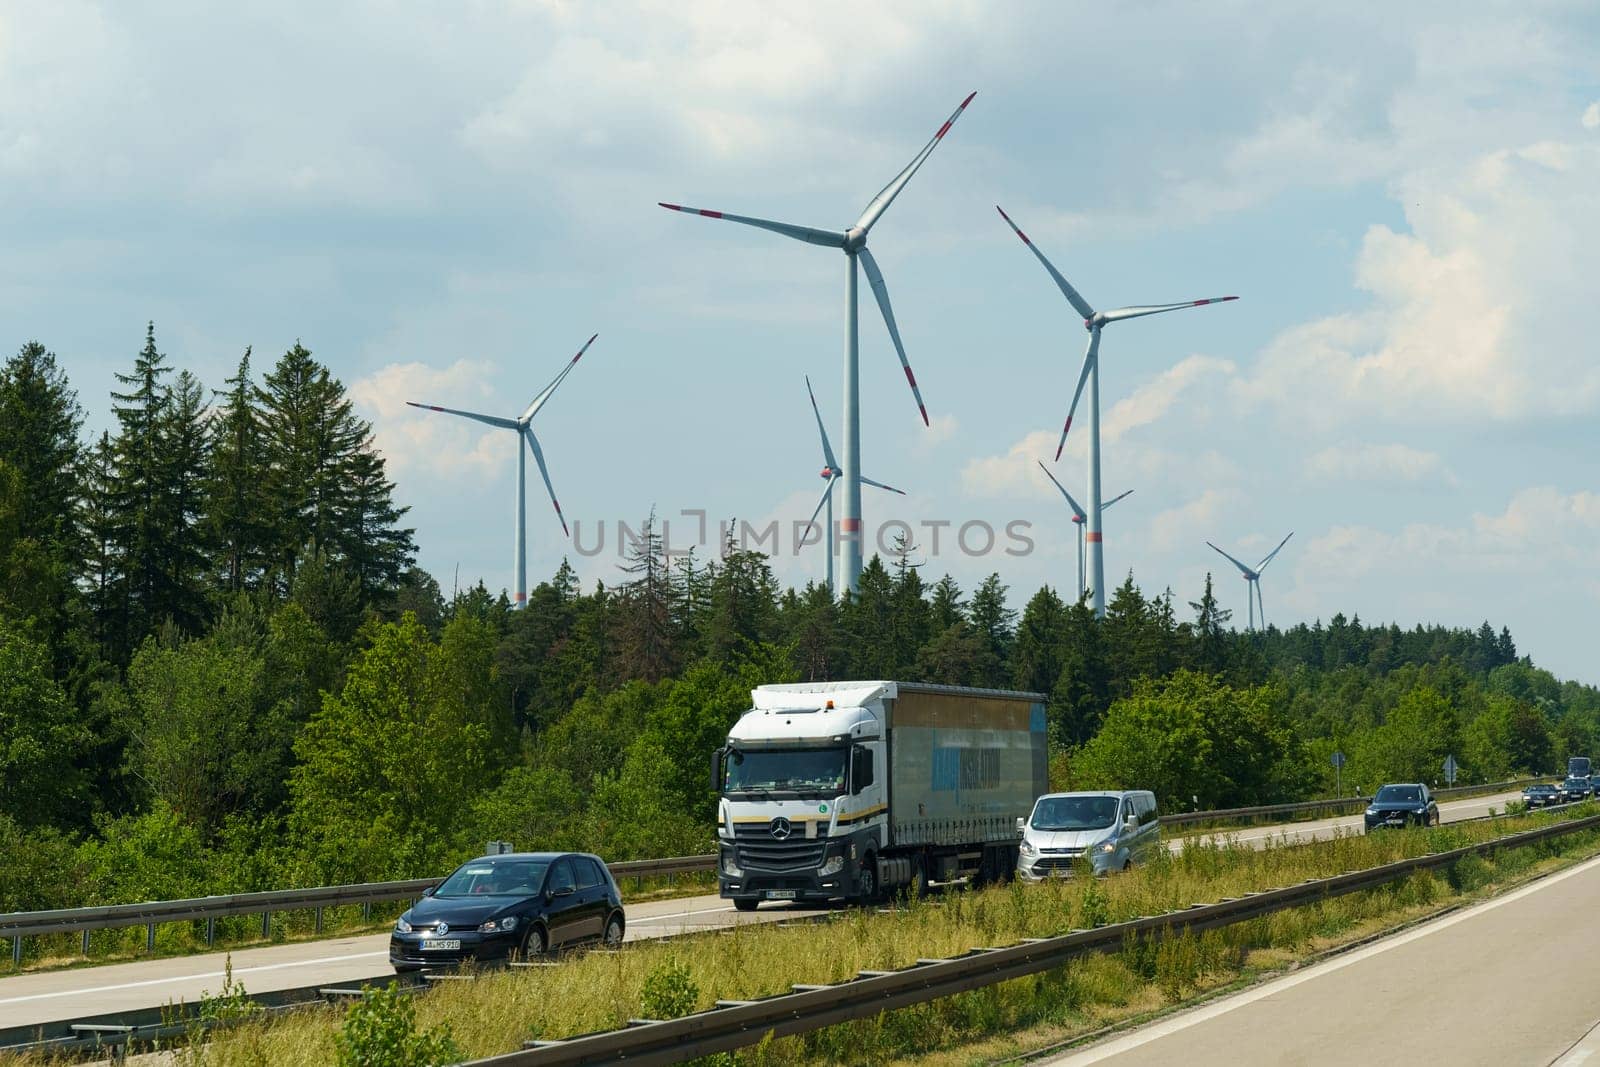 Kassel, Germany - June 9, 2023: A truck drives down a road flanked by tall wind turbines. The massive blades of the turbines spin in the wind as the truck moves along the highway.